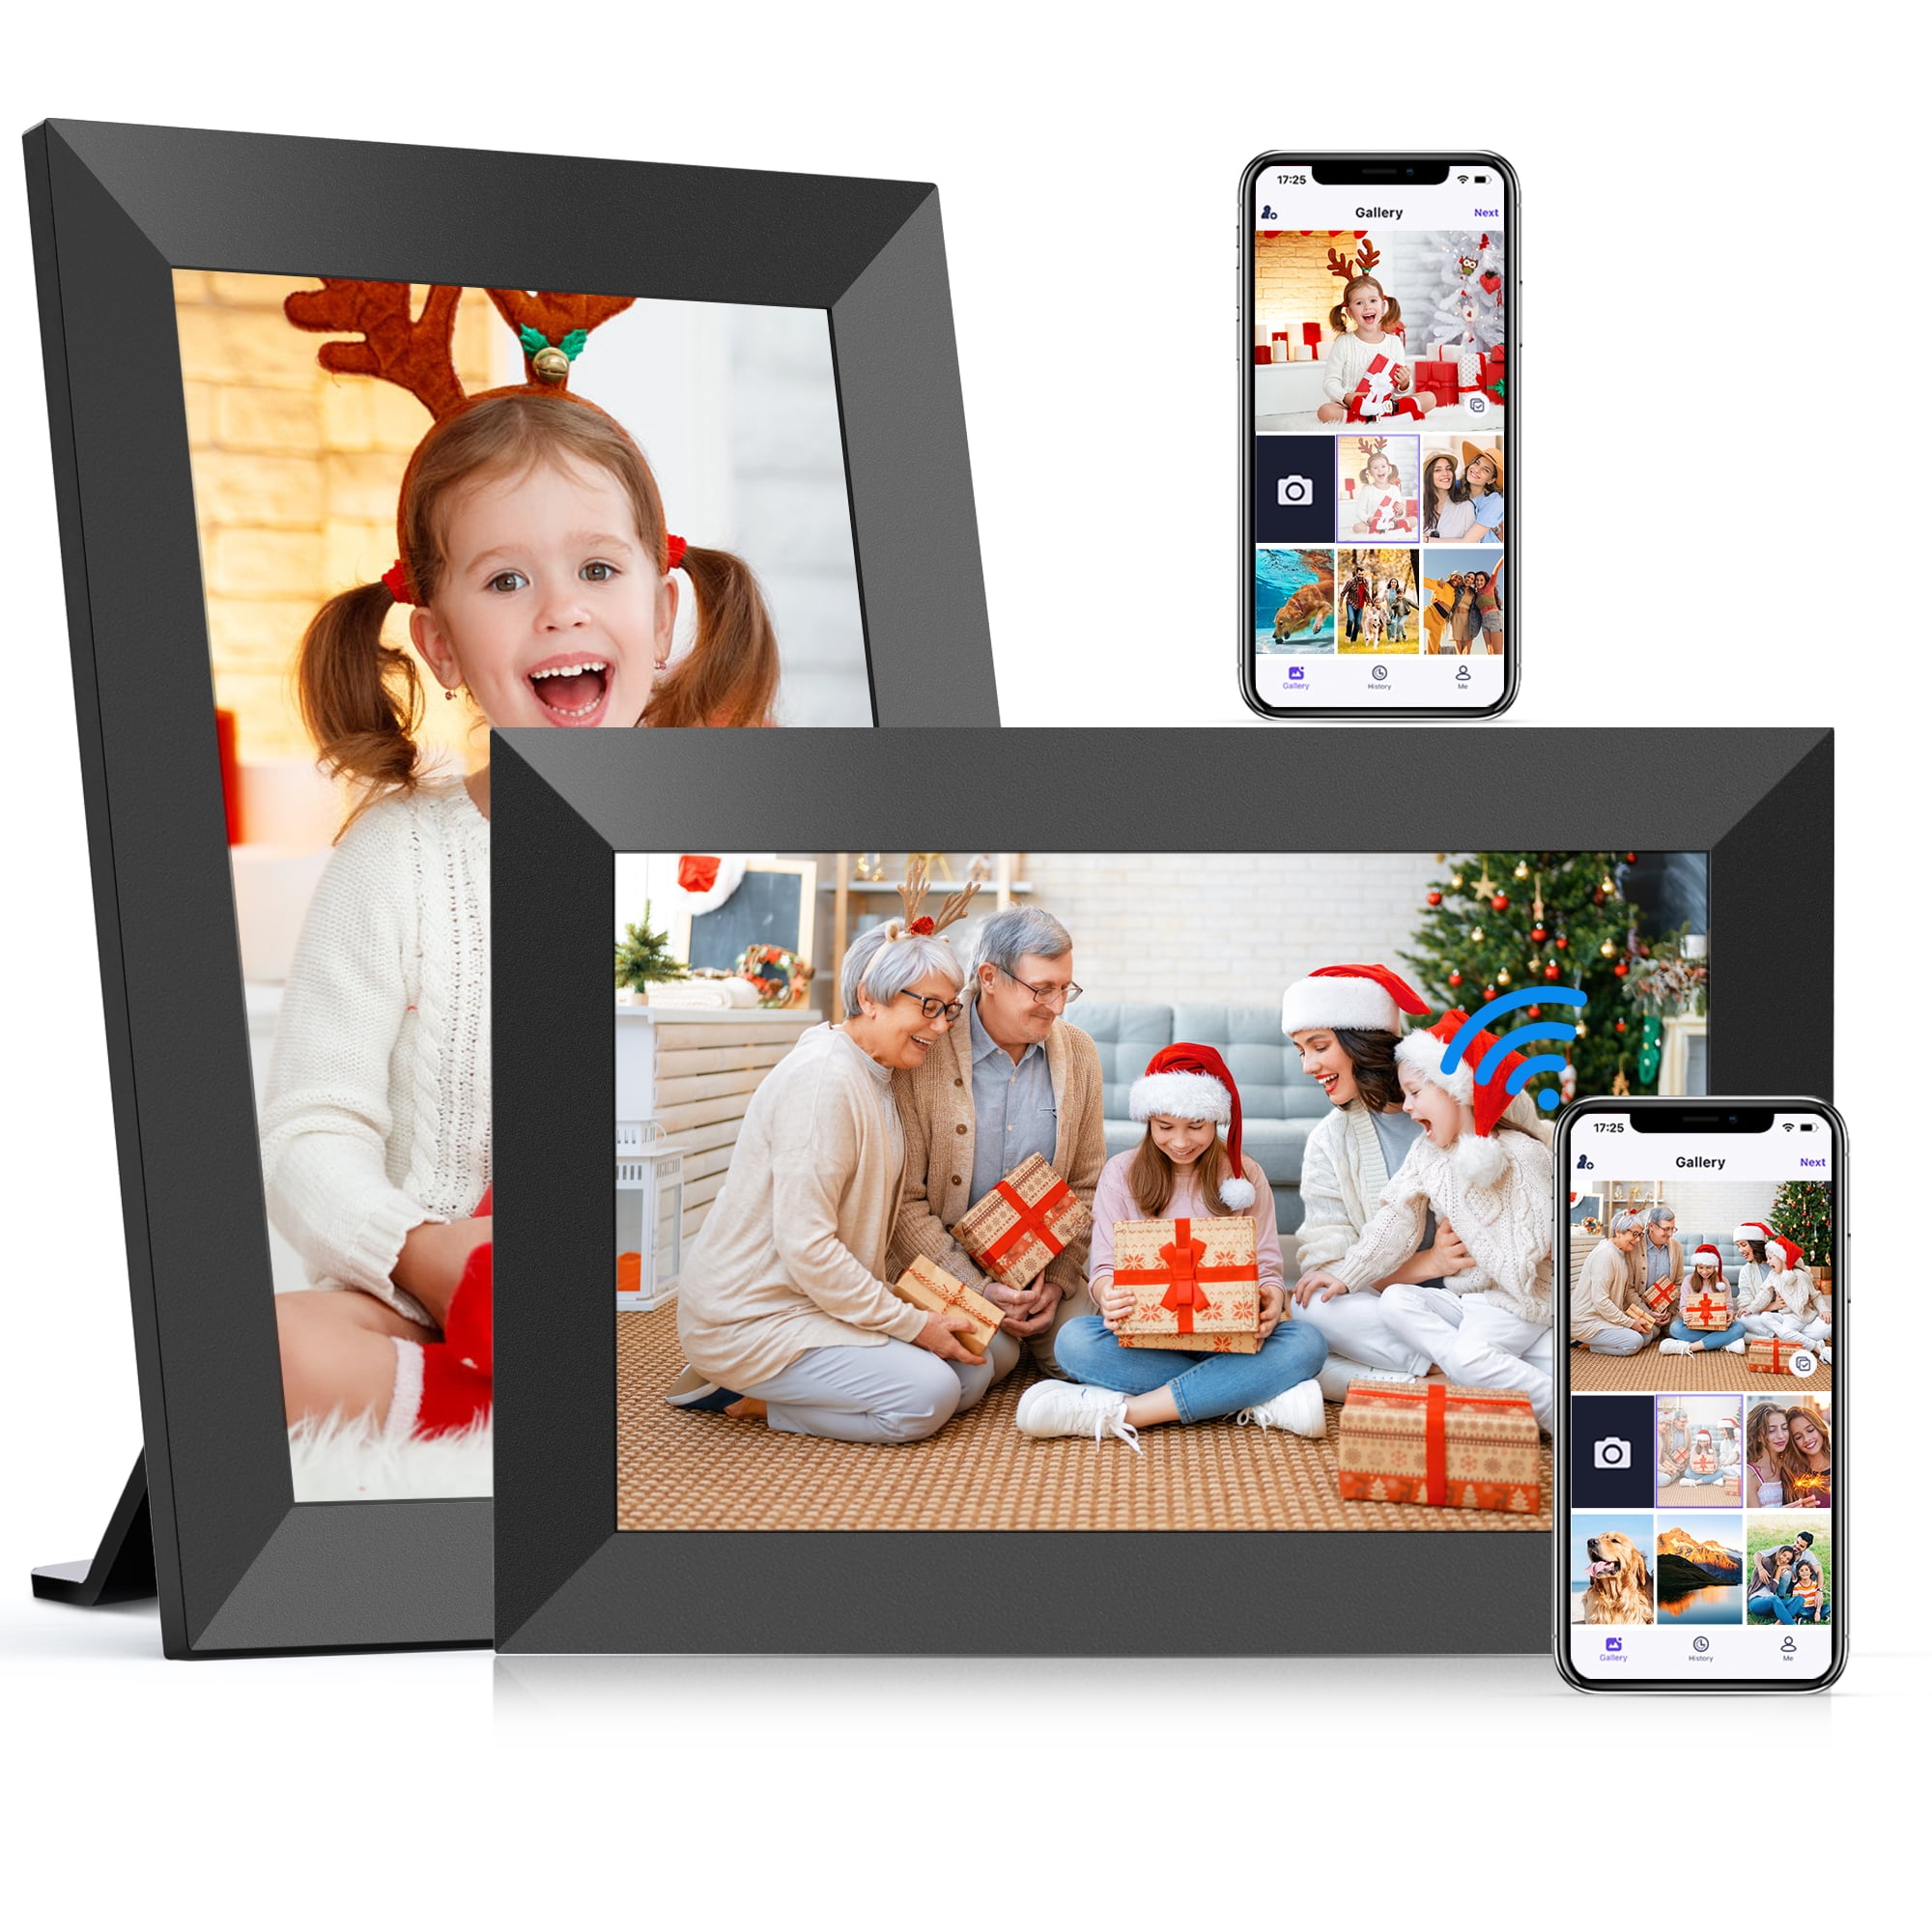 NUSICAN WiFi Digital Picture Frame, 10.1 Smart Photo Frames Touch Screen  with 32G Memory, HD Electric Picture Frame support Wall Mount, Auto-Rotate,  Share Instant Photos from Anywhere, Best Gifts！ 